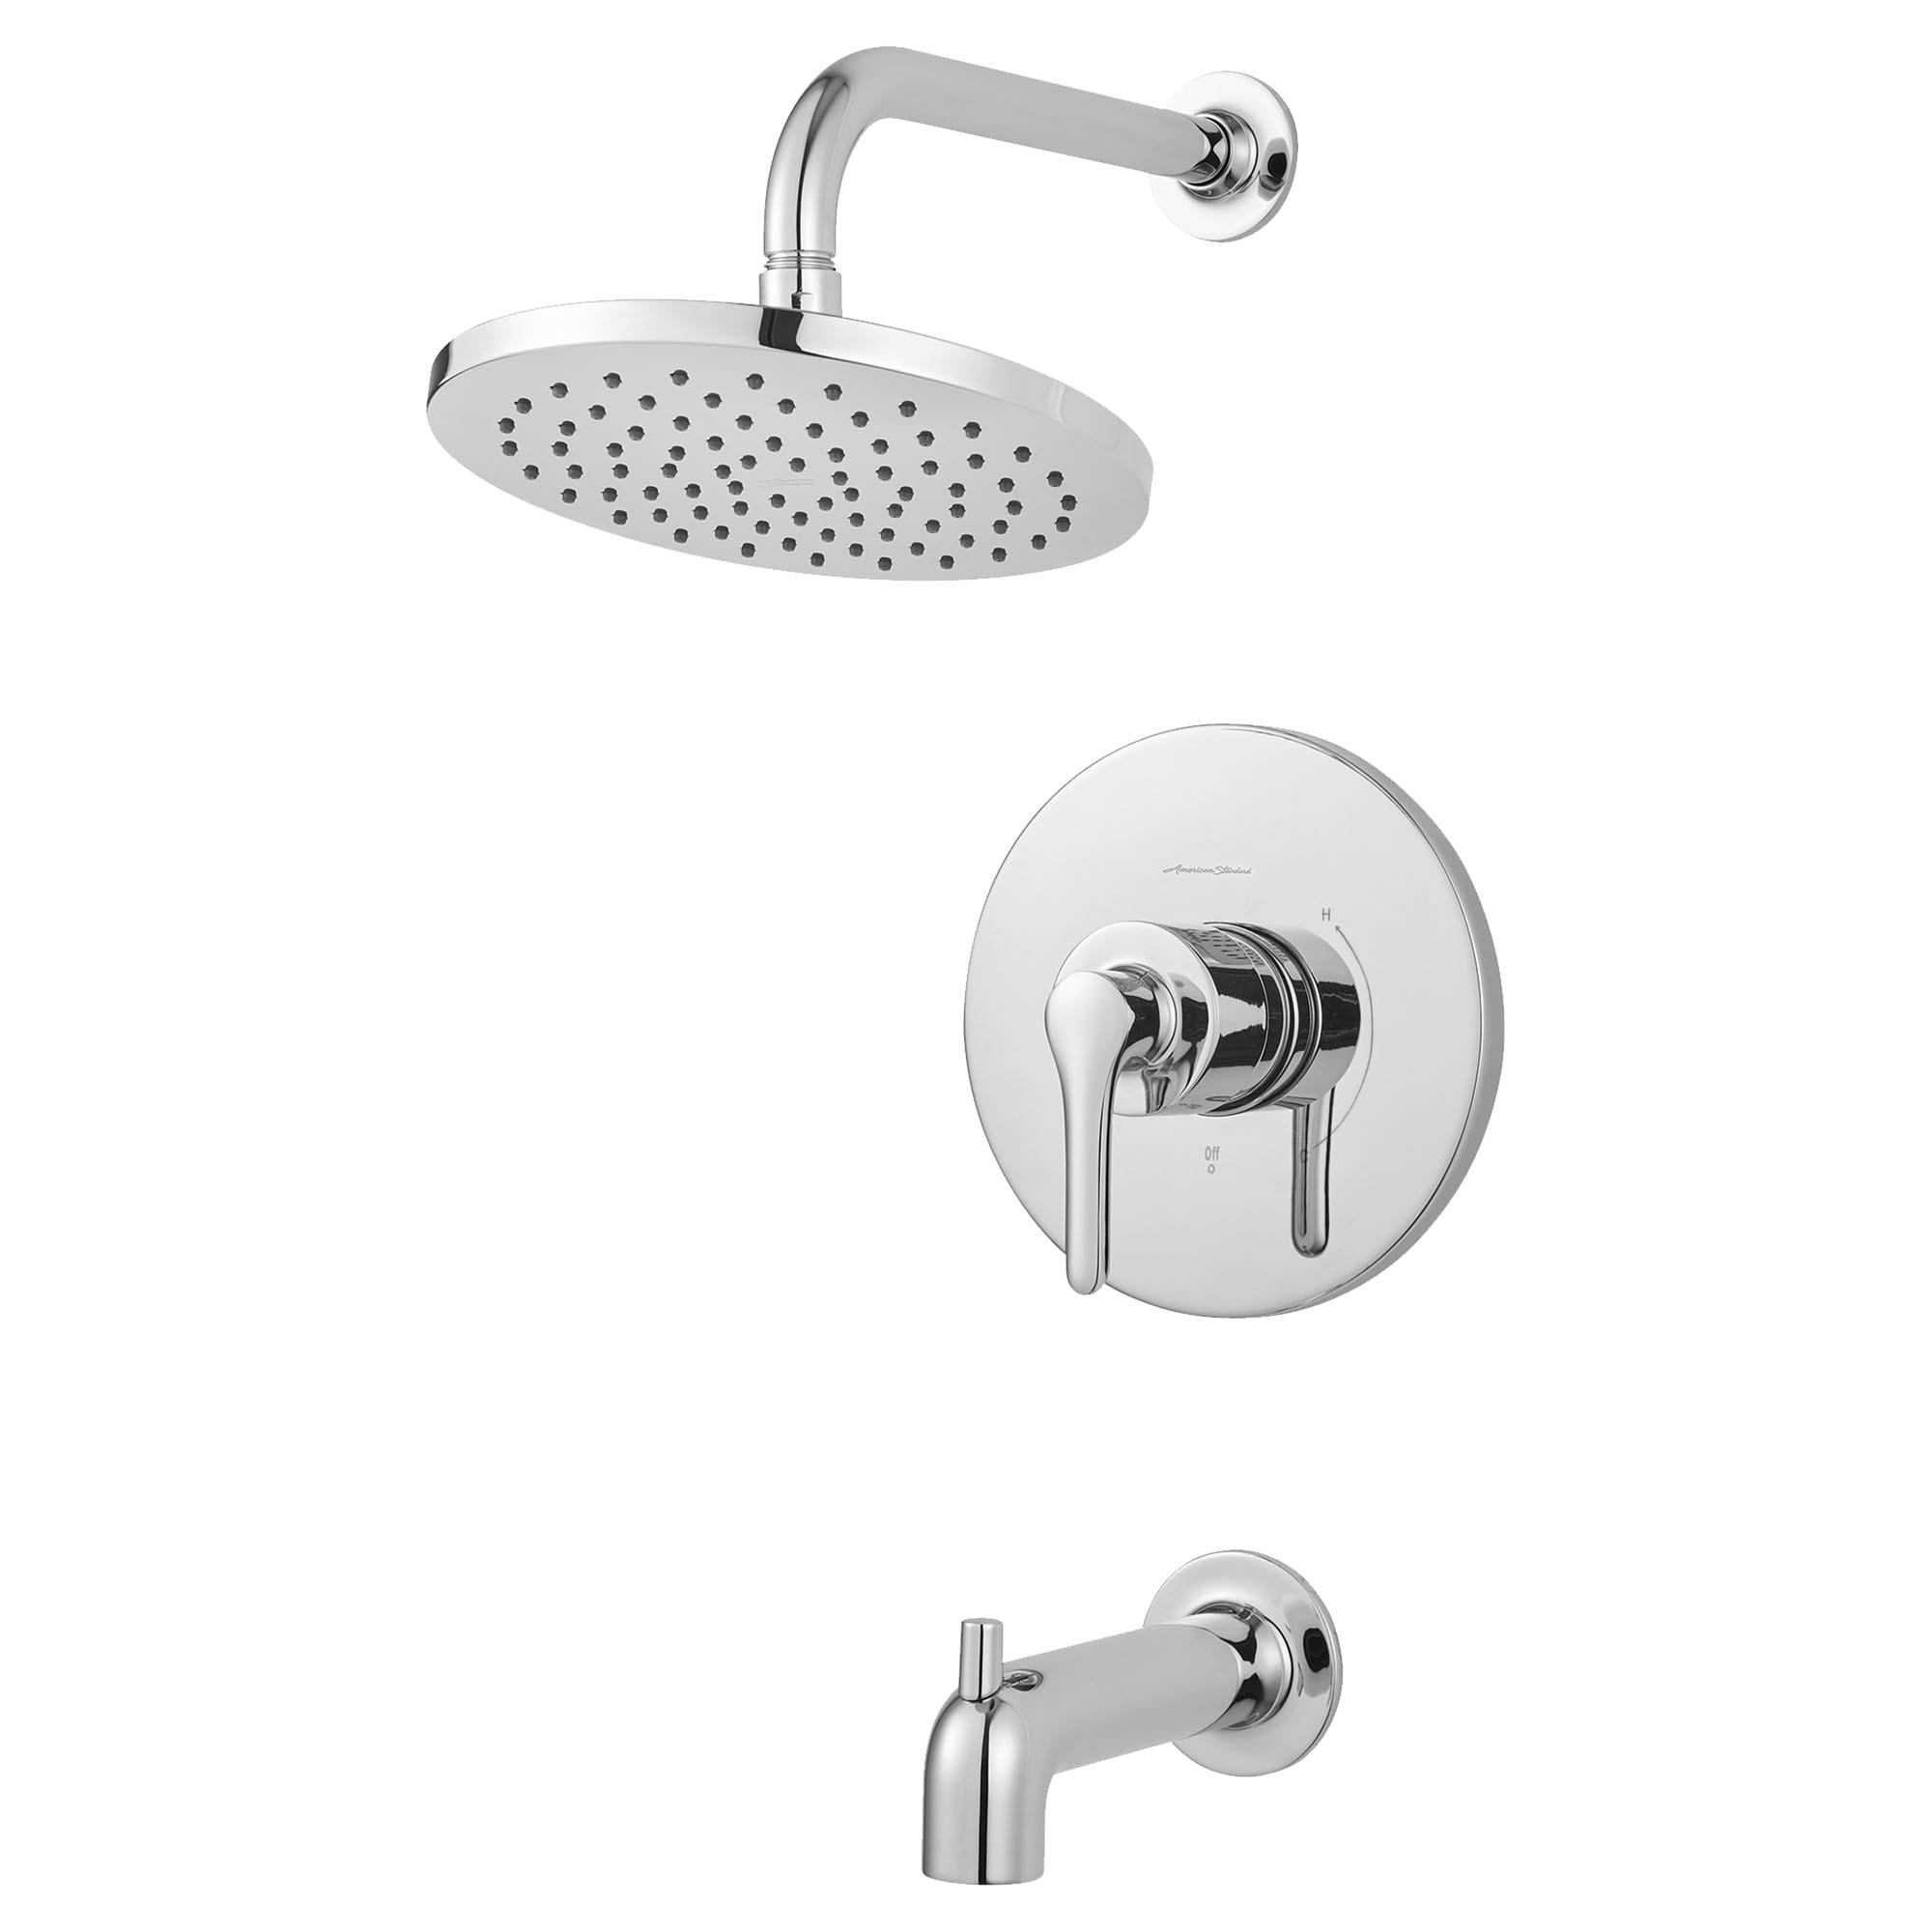 Studio® S 1.8 gpm/9.5 L/min Tub and Shower Trim Kit With Rain Showerhead, Double Ceramic Pressure Balance Cartridge With Lever Handle